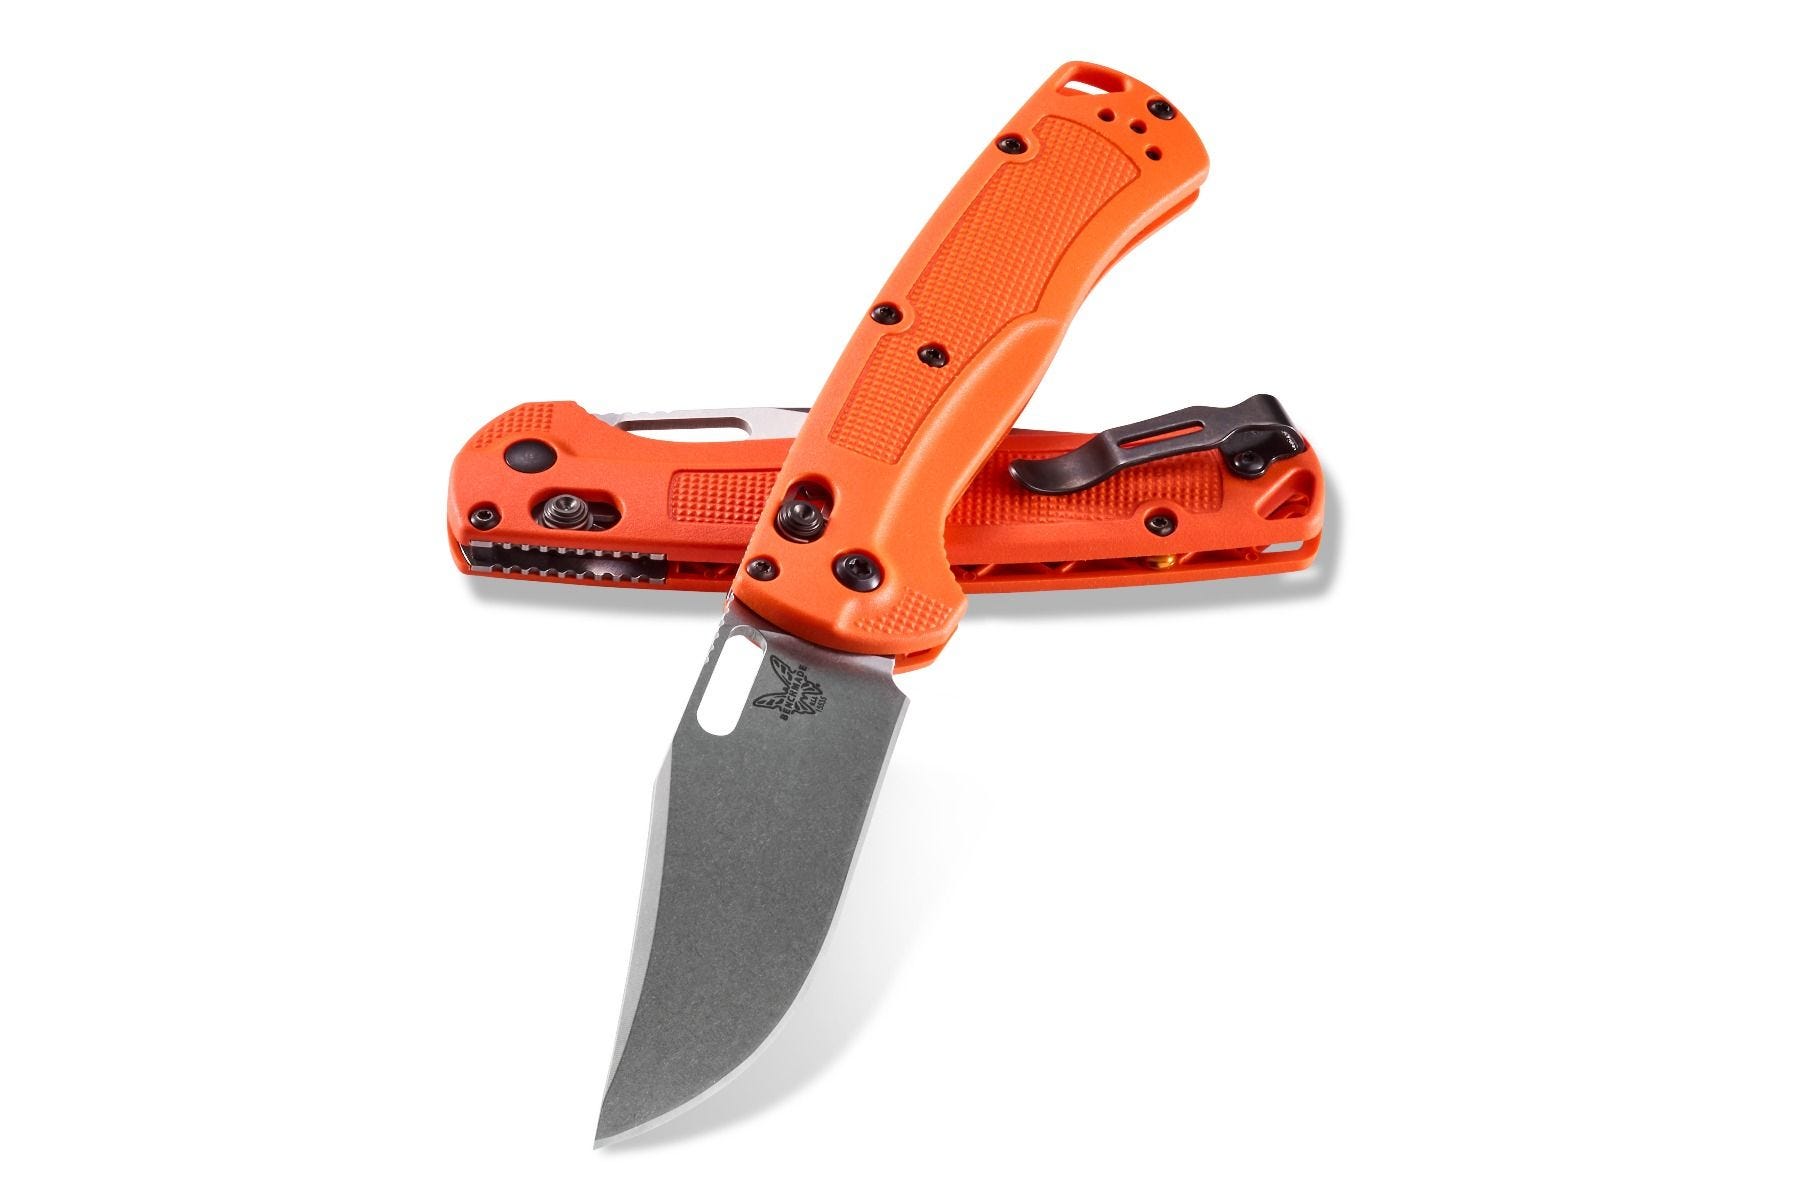 Benchmade Taggedout Knife